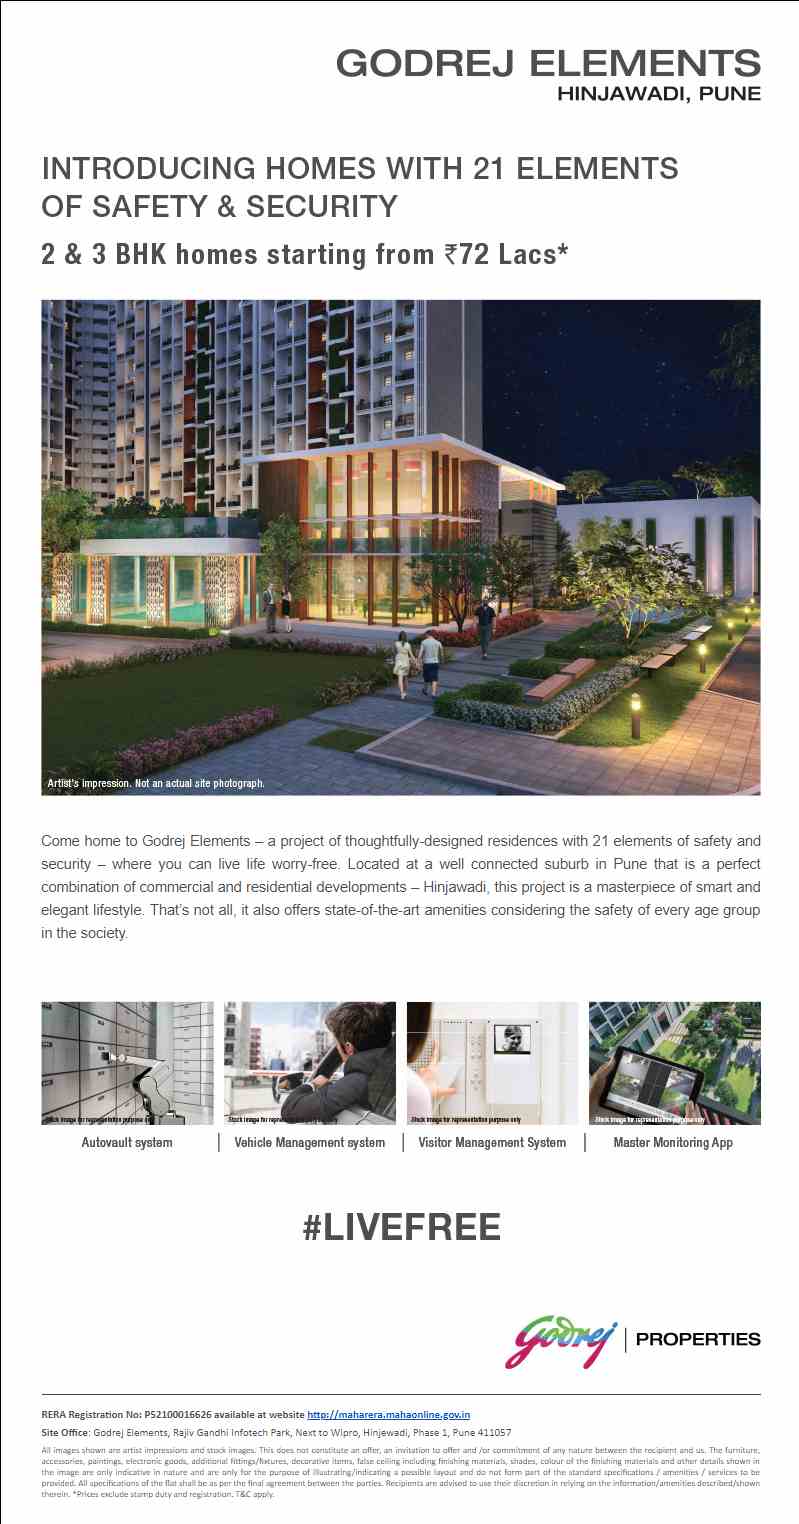 Live in home with 21 elements of safety & security at Godrej Elements in Pune